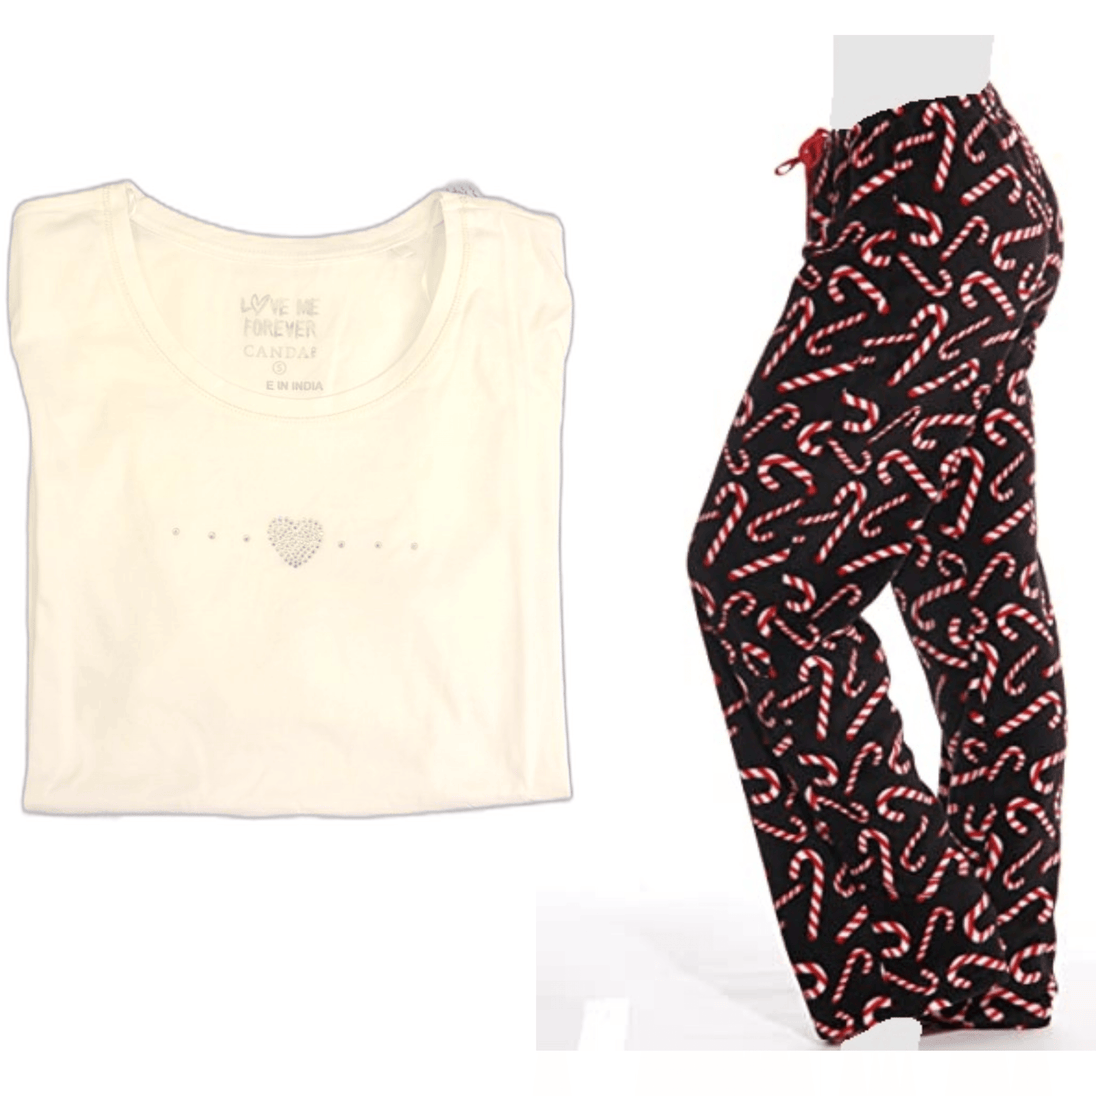 Women's Cozy Pajama Set Plush Candy Cane Pants and Cotton Soft Heart T shirt by Just Love - PremiumBrandGoods